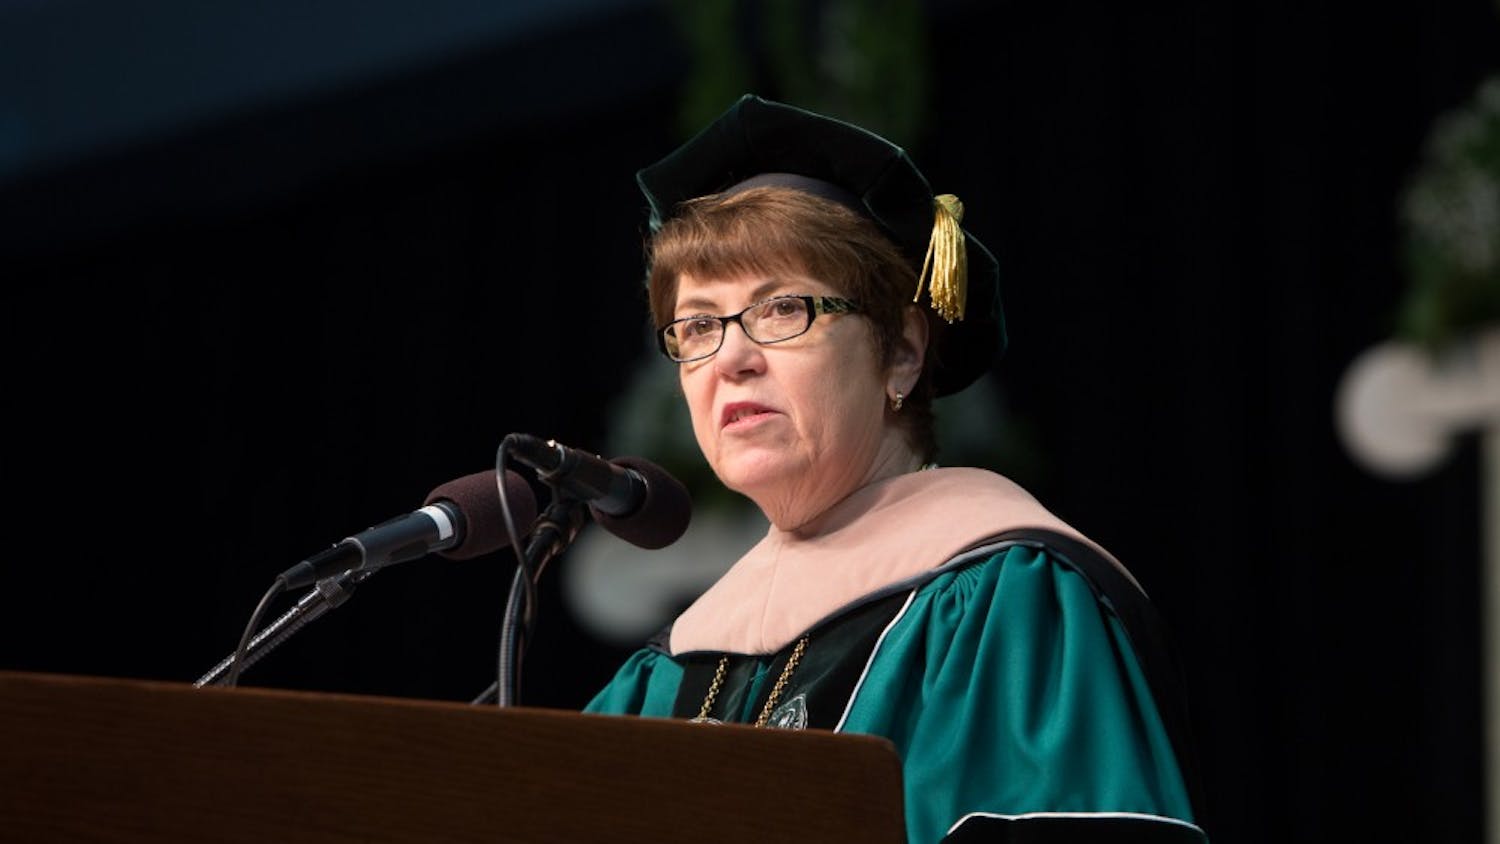 Eastern Michigan University President Dr. Susan Martin speaks before the graduates on Sunday morning at the Convocation Center.